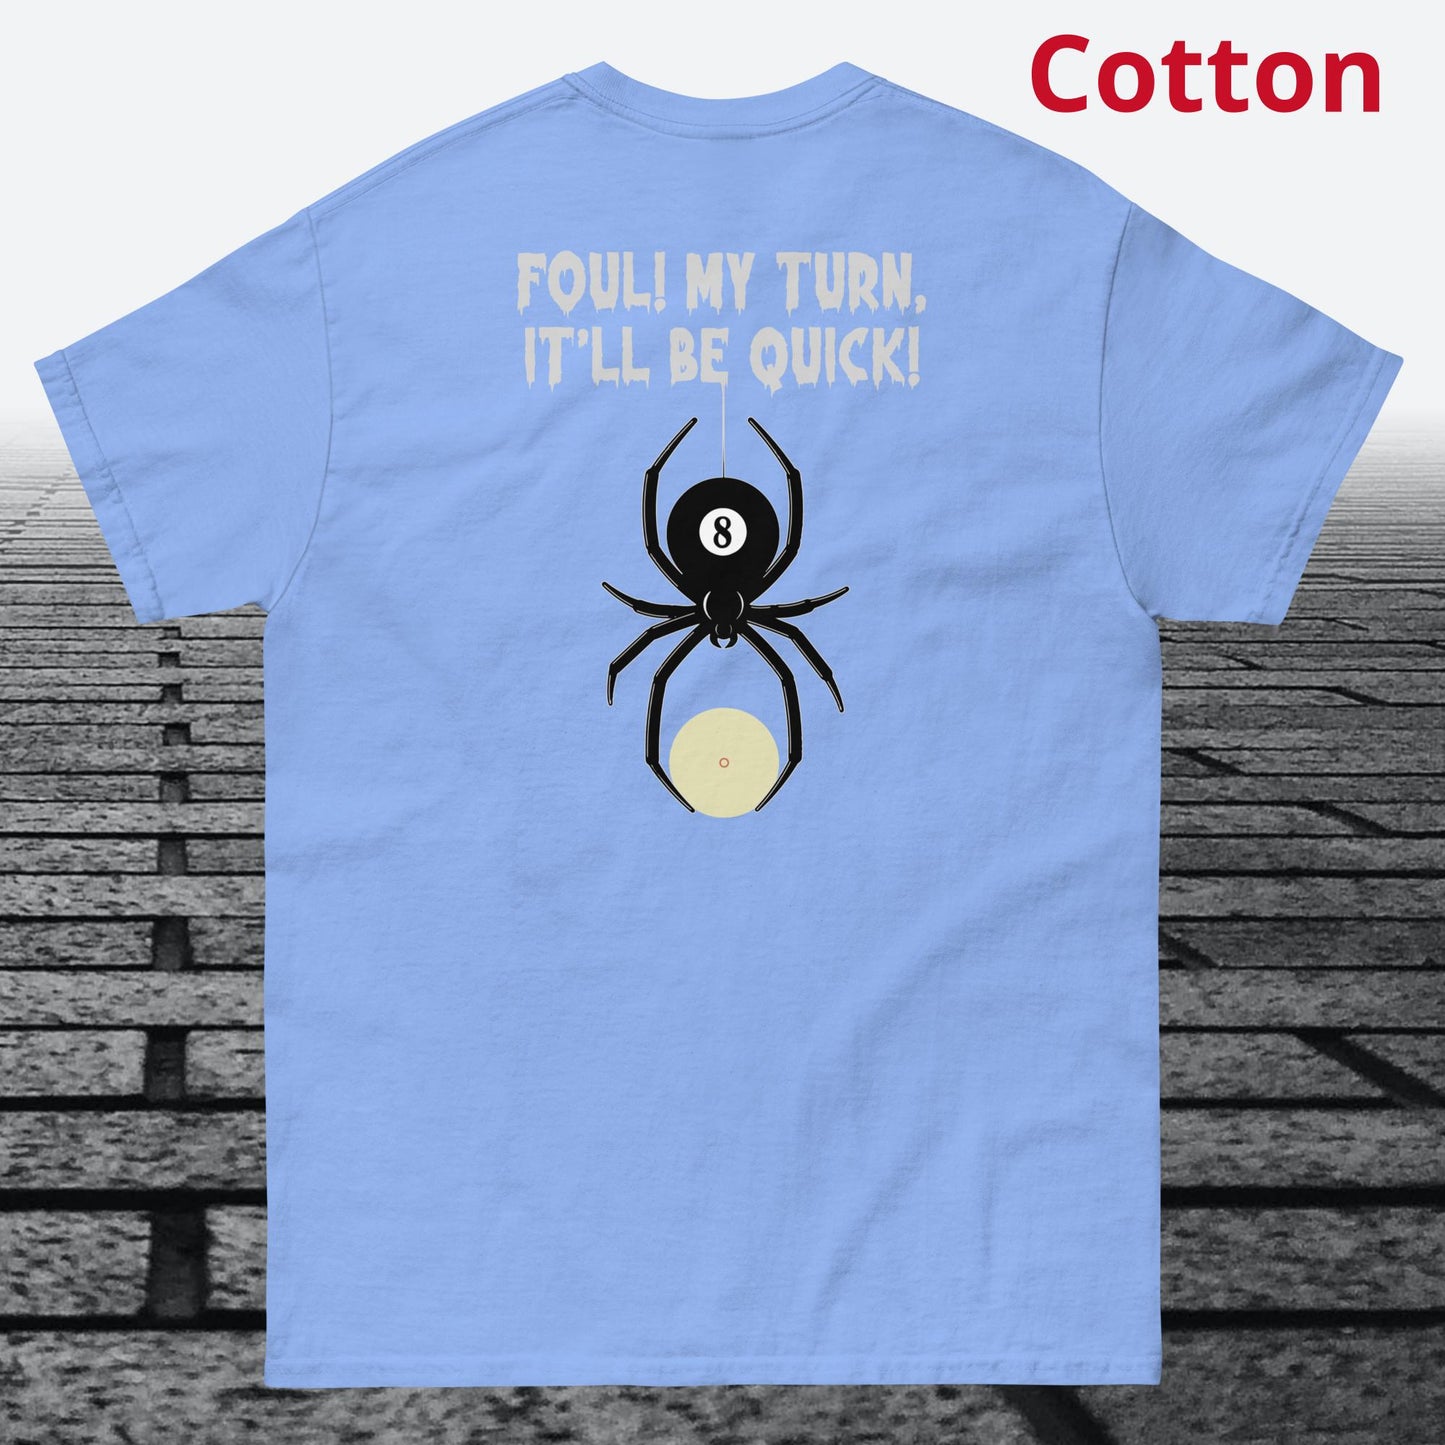 Foul, my Turn, It'll be Quick, on the back of shirt,  Cotton T-shirt,